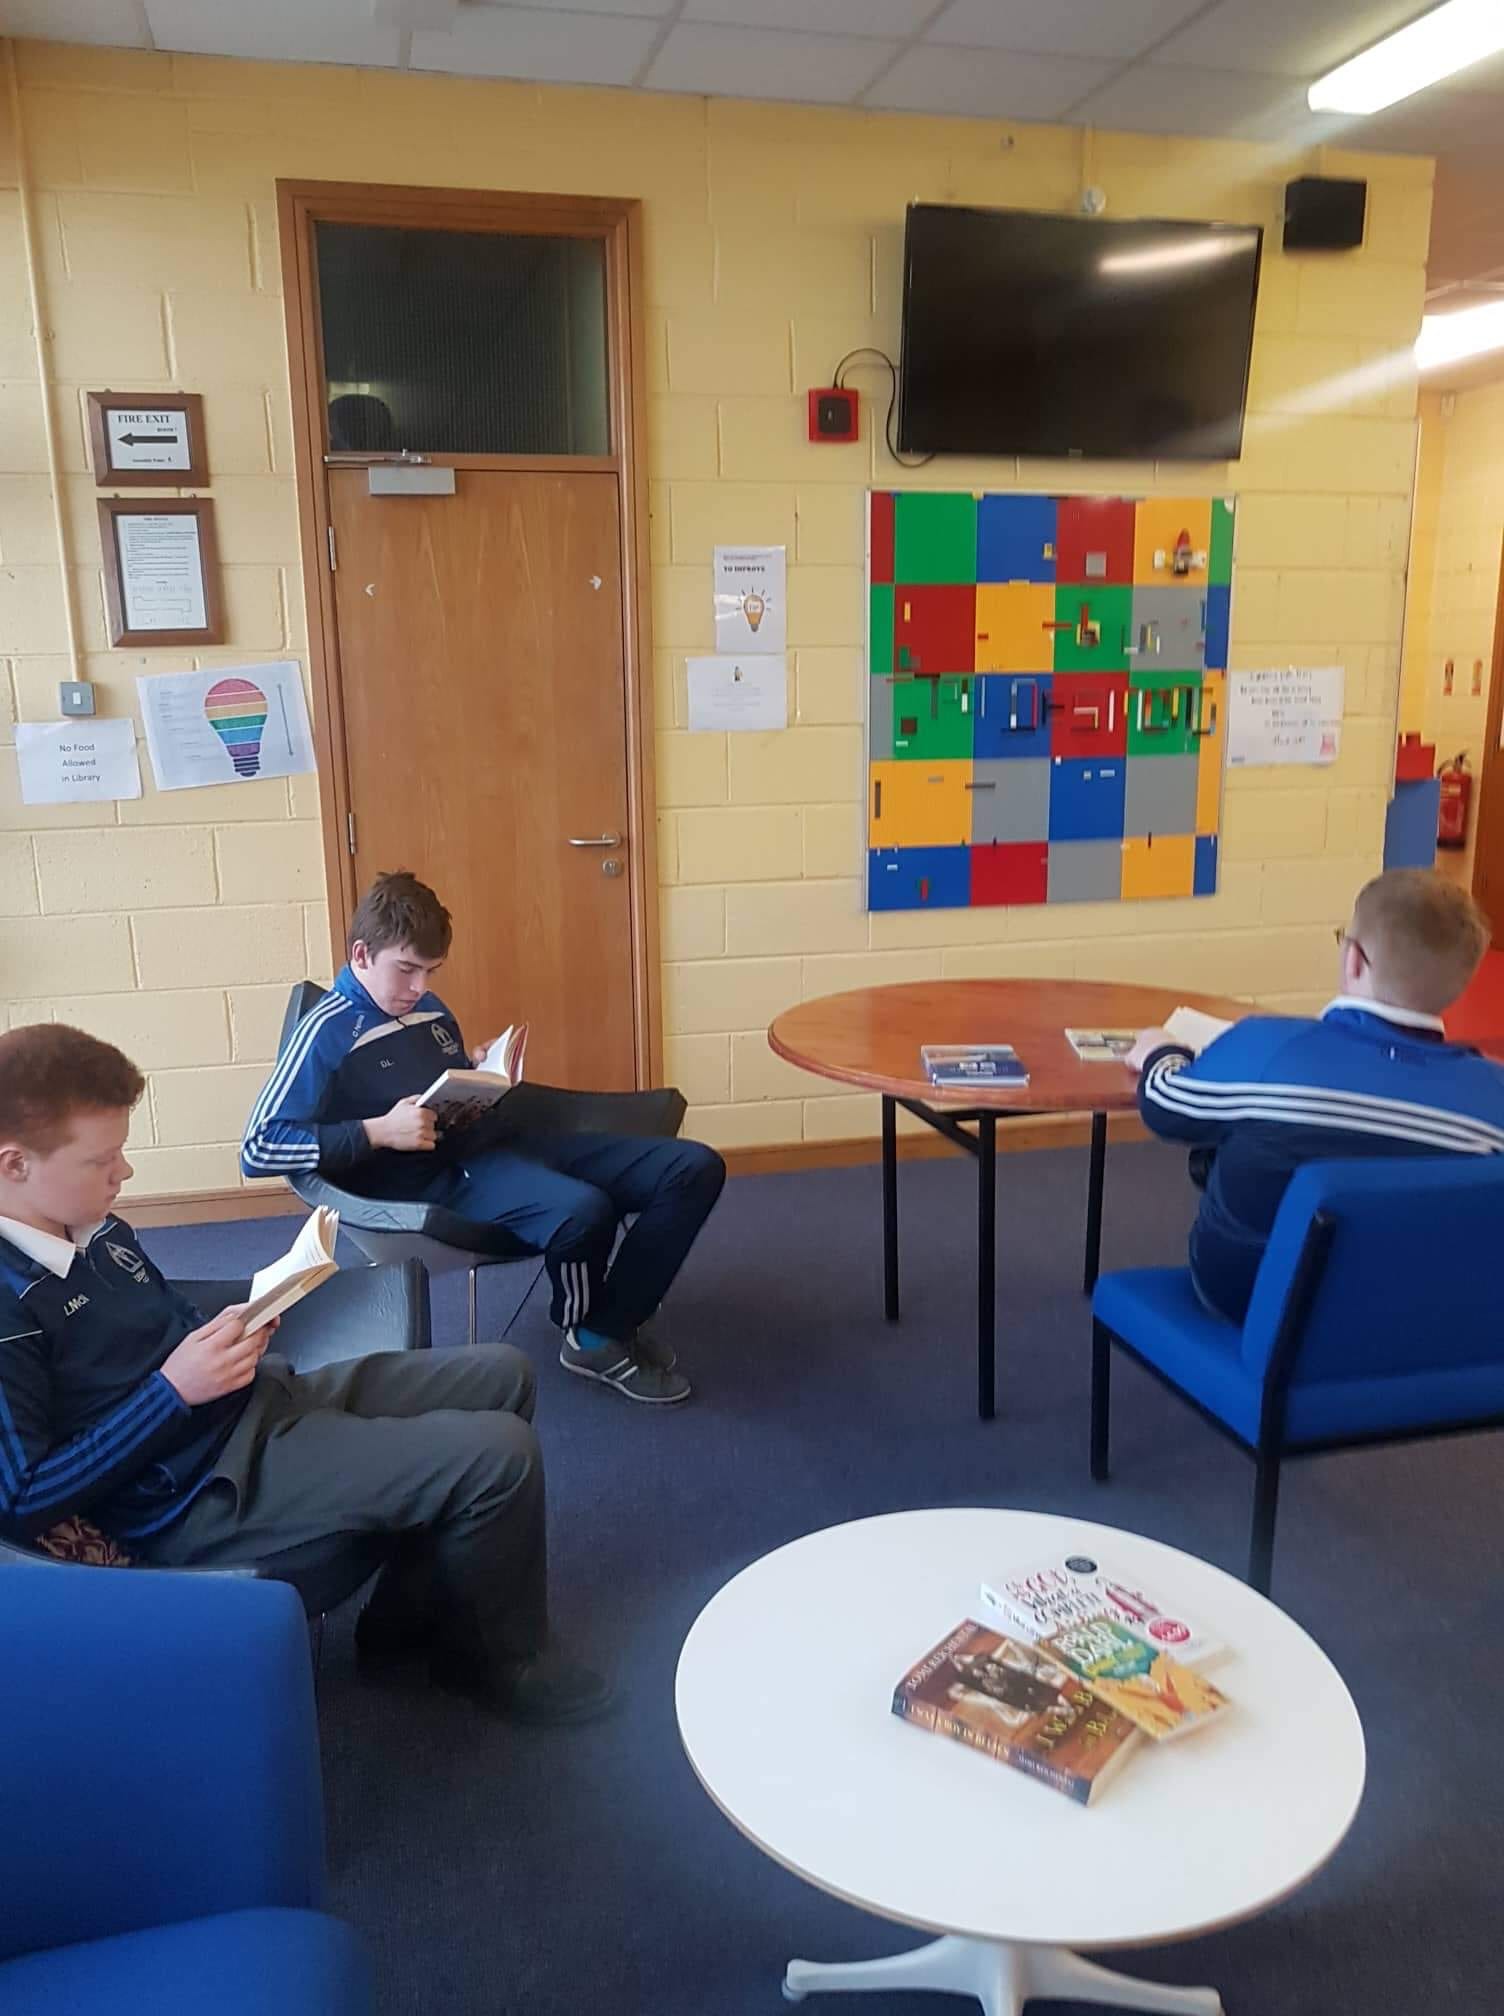 Students from Rang Grandin visiting the School Library as part of World Book Day 2019